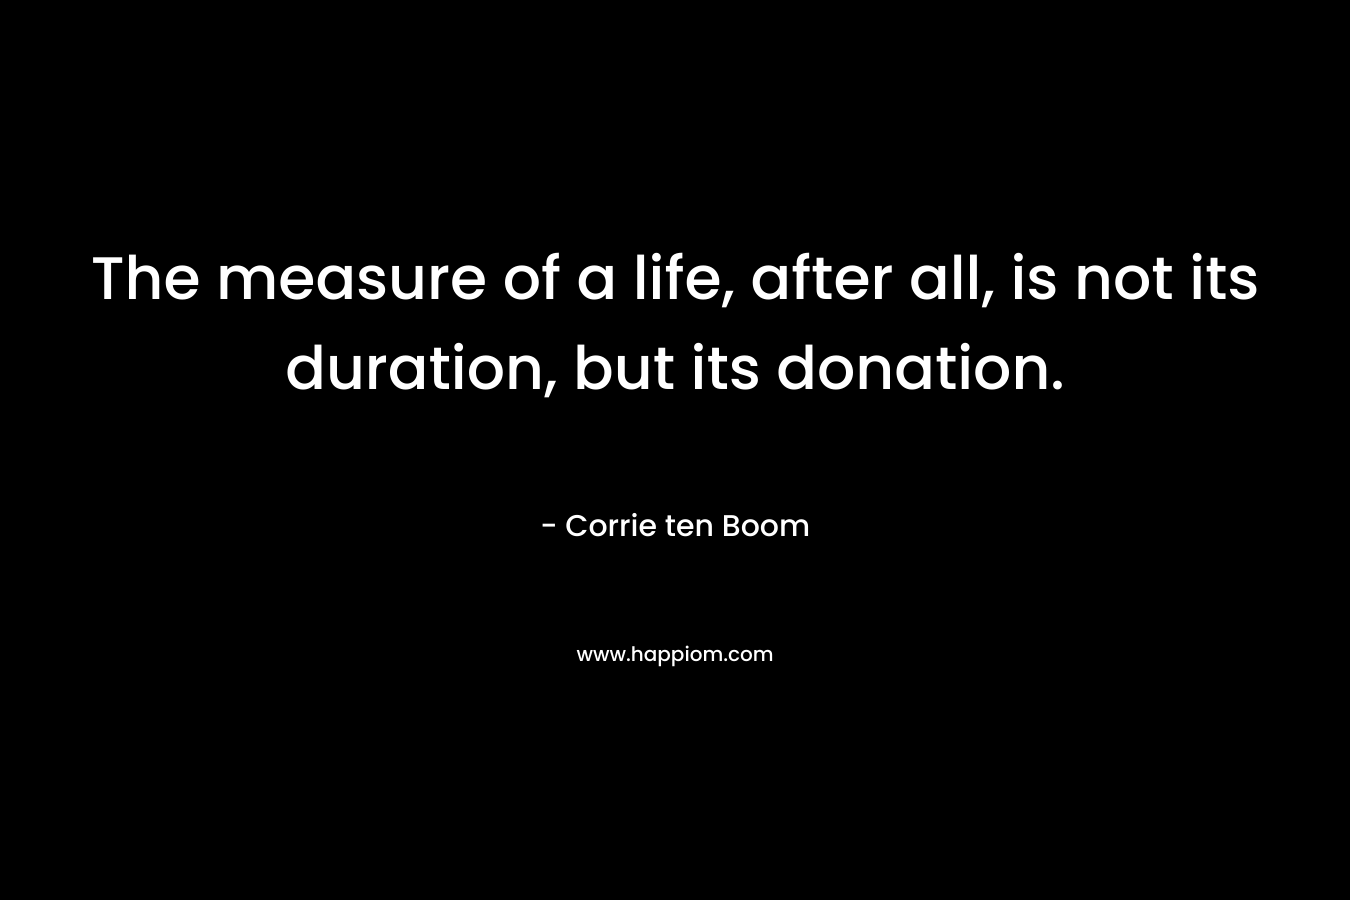 The measure of a life, after all, is not its duration, but its donation. – Corrie ten Boom